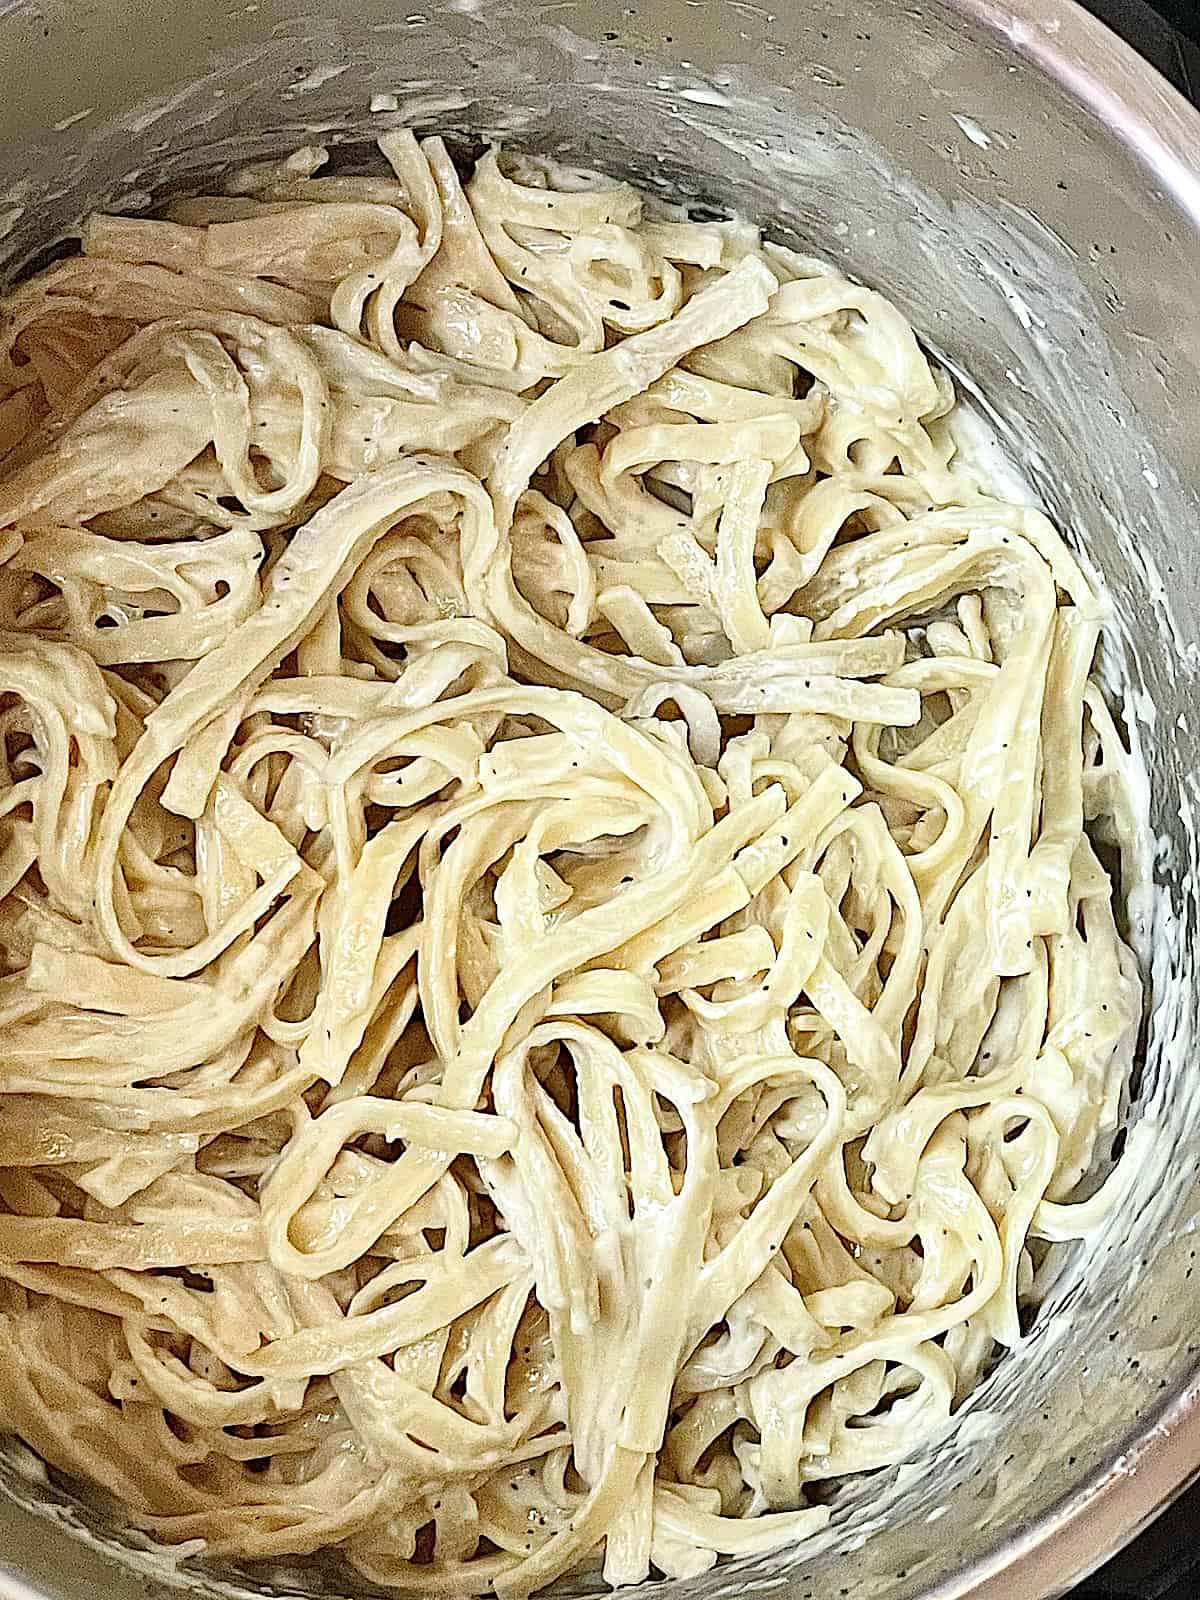 noodles in an instant pot mixed with heavy cream and parmesan cheese